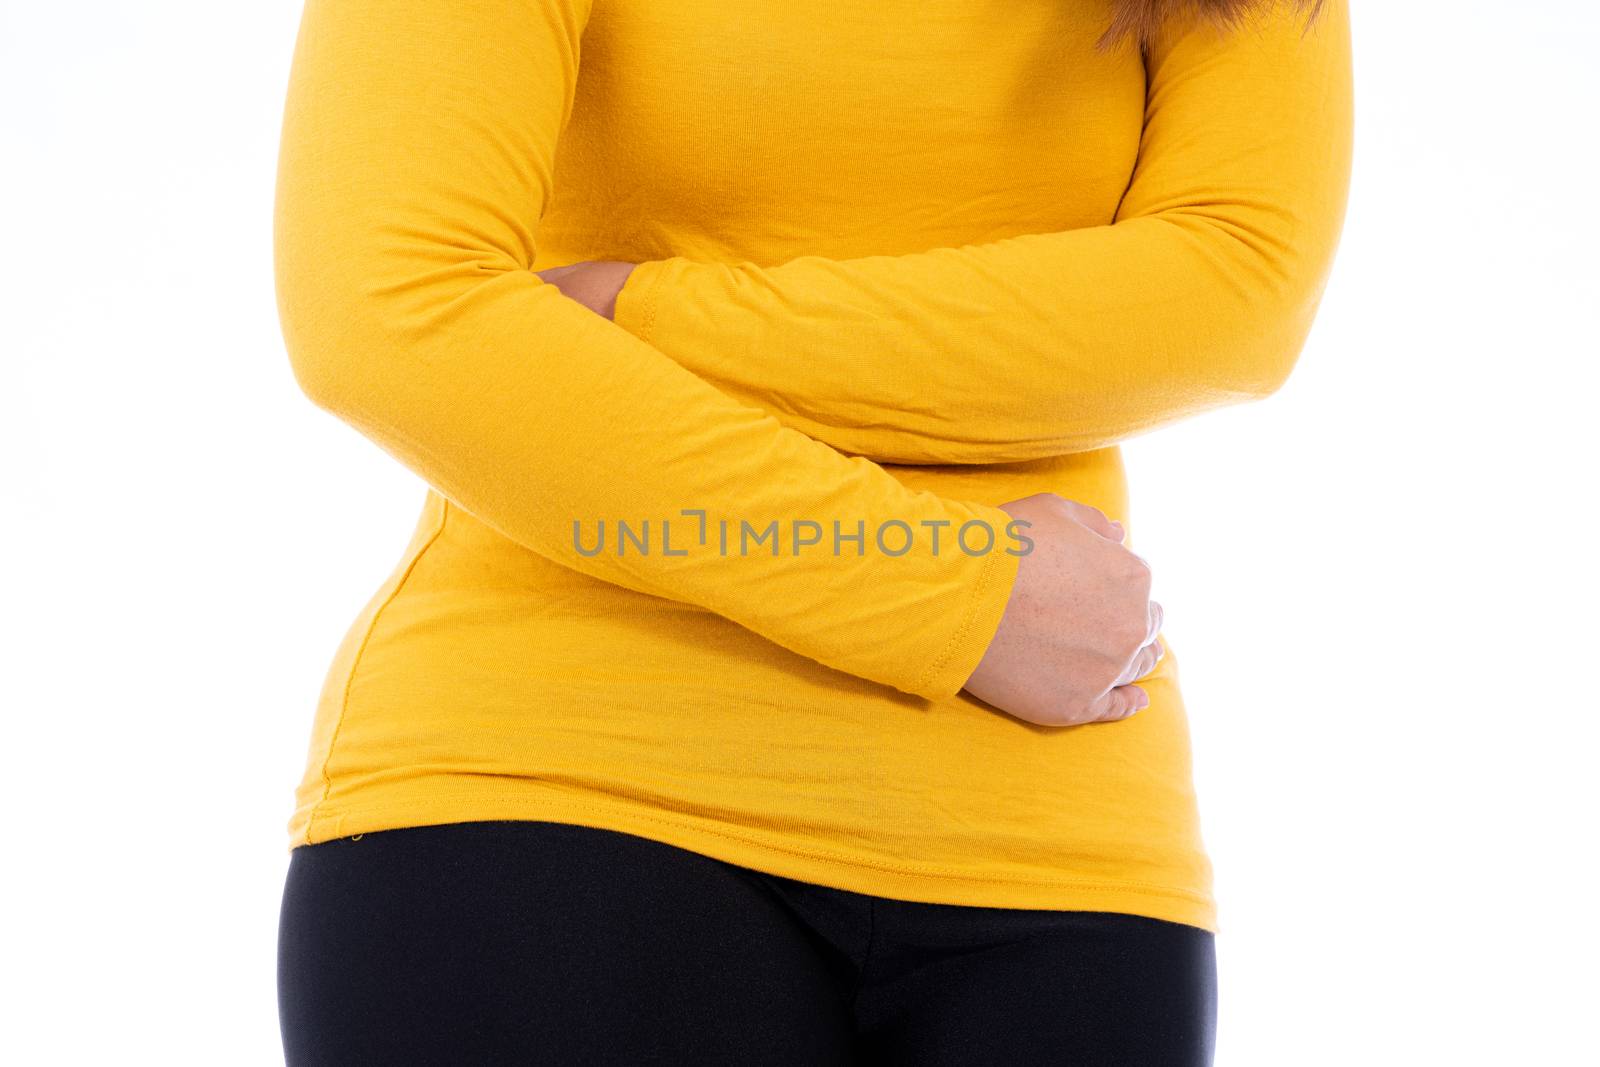 Woman suffering from stomach pain and injury isolated white background. Health care and medical concept.